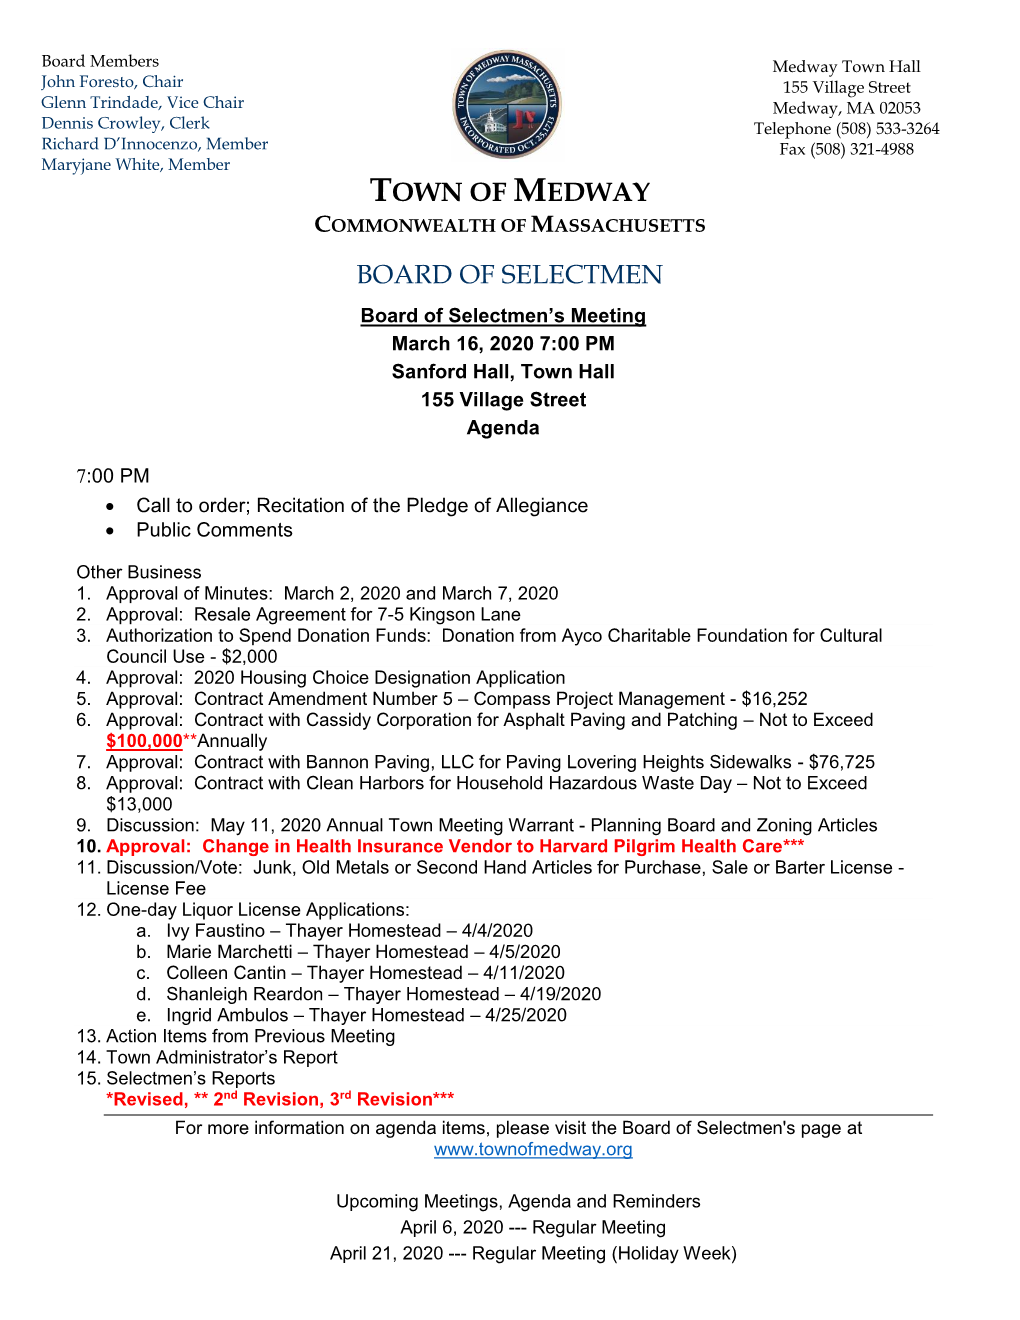 Town of Medway BOARD of SELECTMEN 155 Village Street, Medway MA 02053 (508) 533-3264 (508) 321-4988 (F)